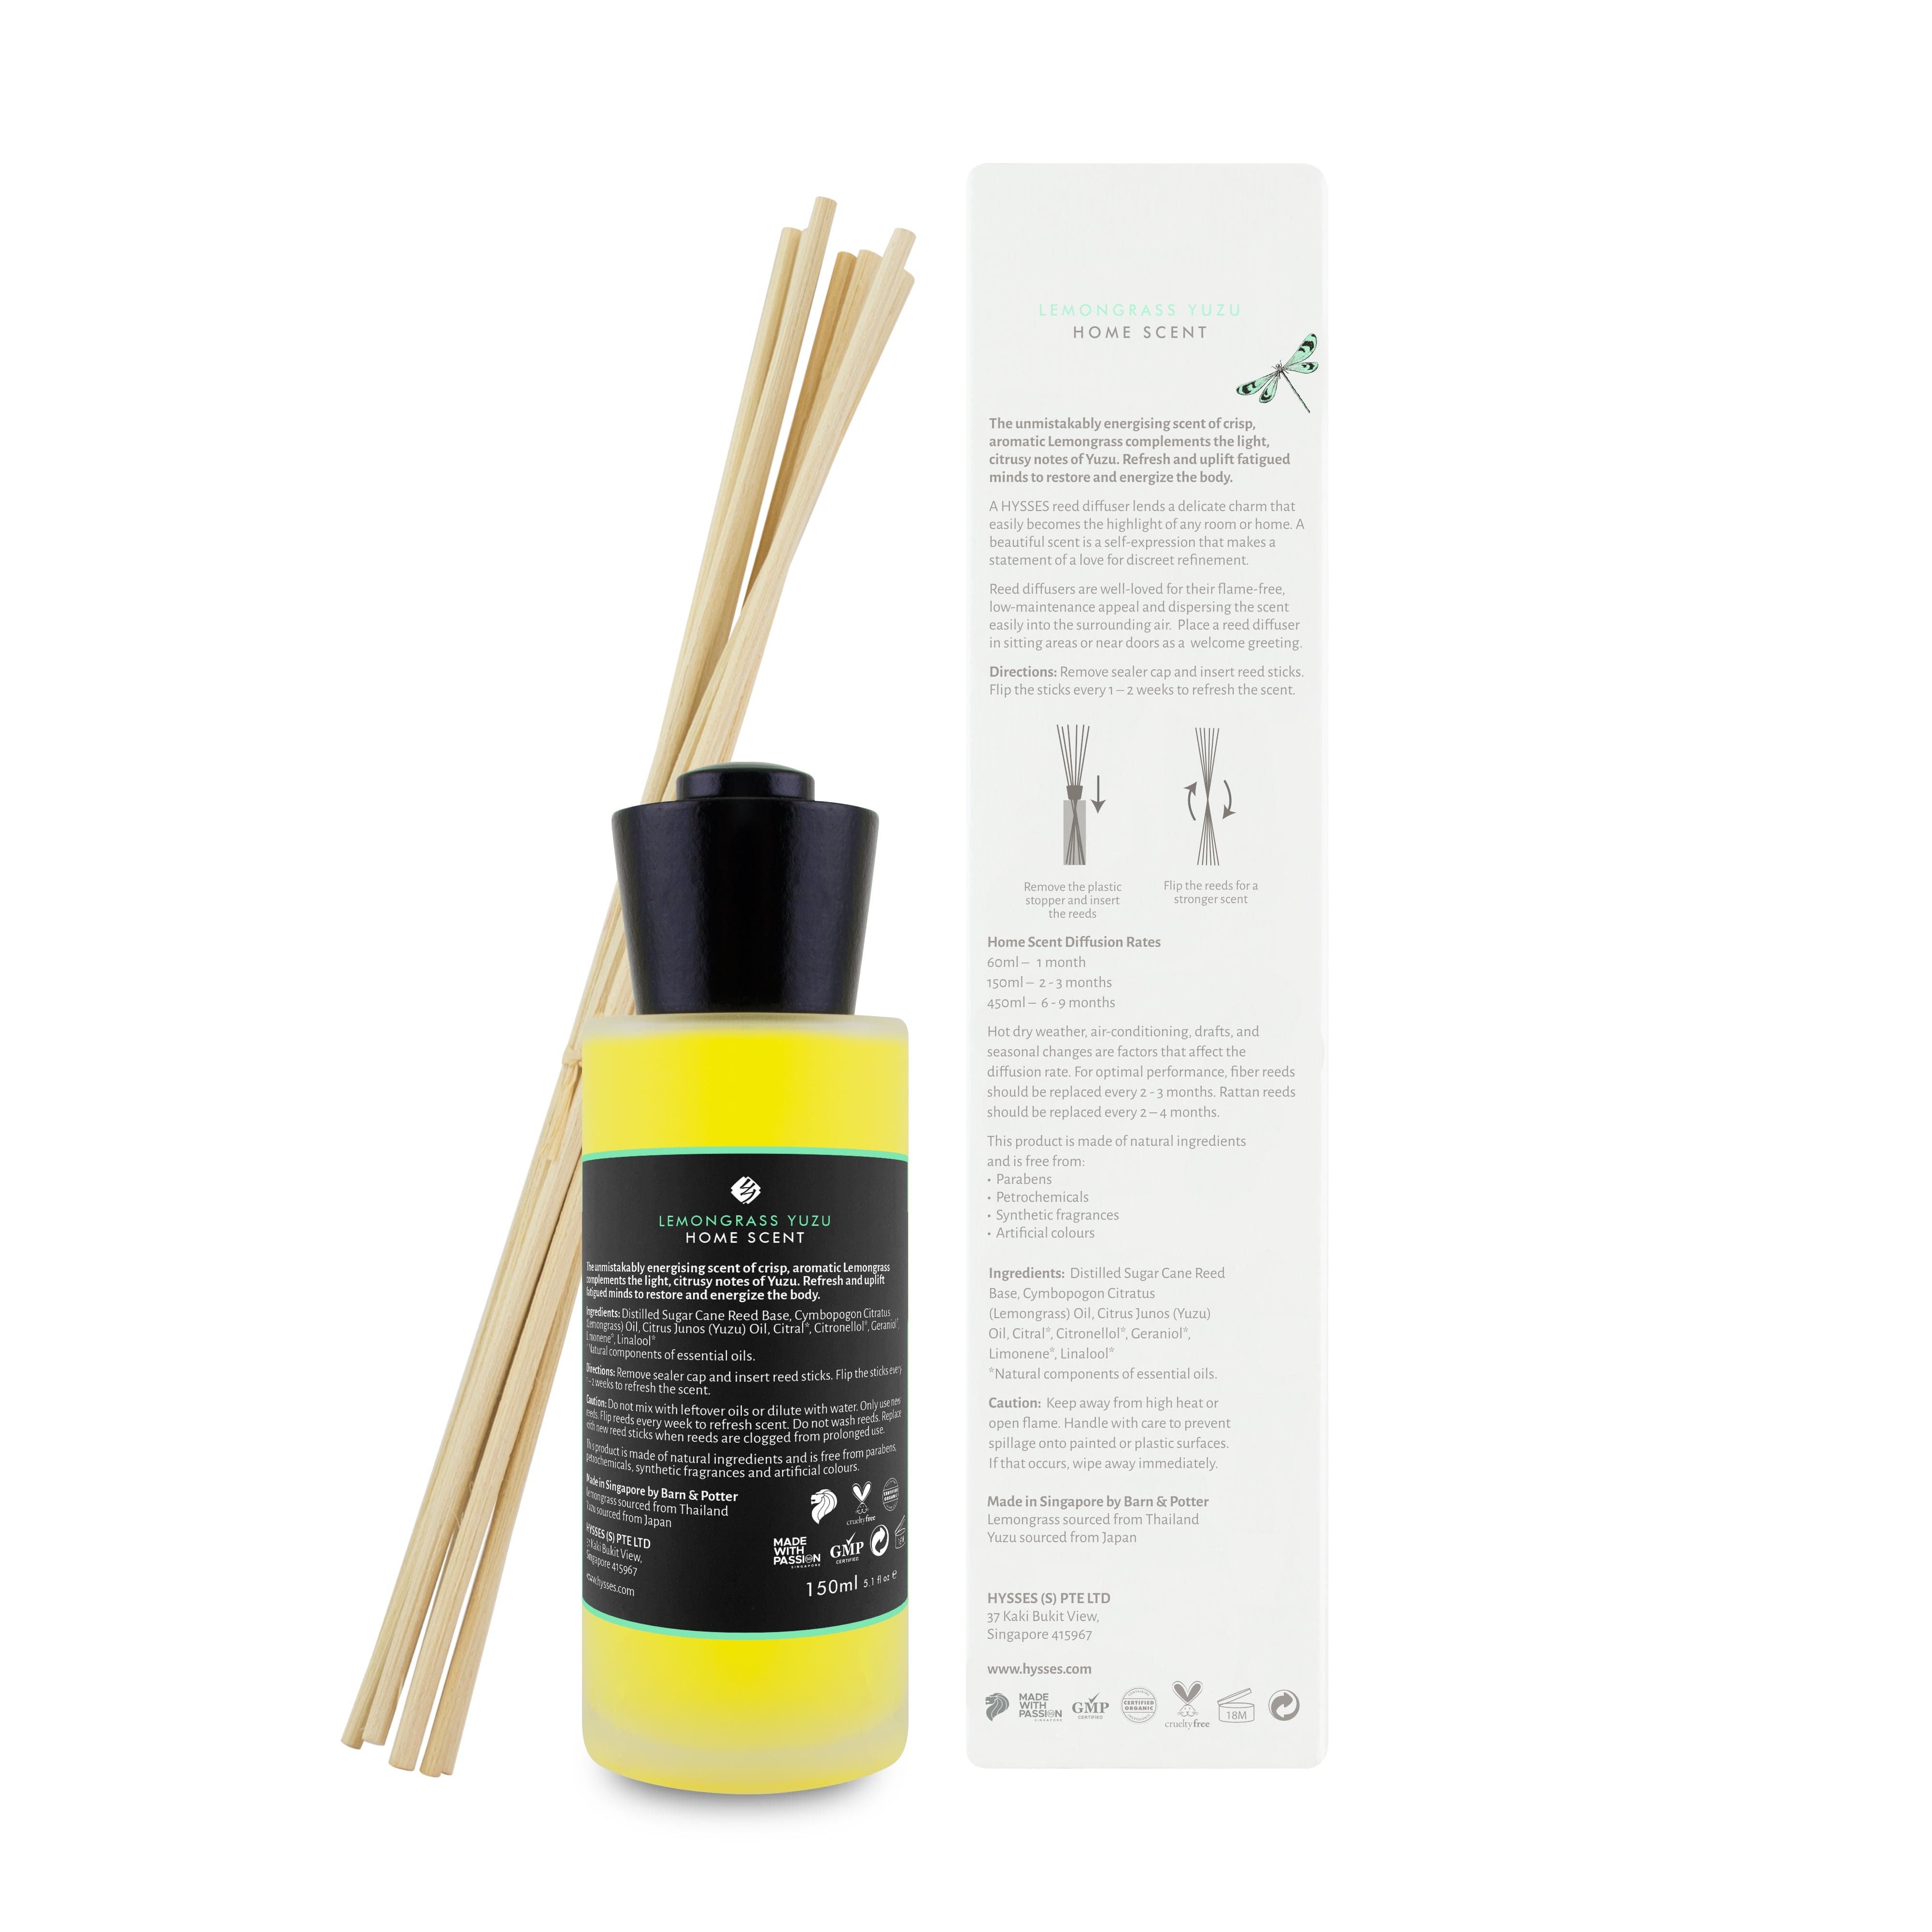 Hysses Home Scents Home Scent Reed Diffuser Lemongrass Yuzu